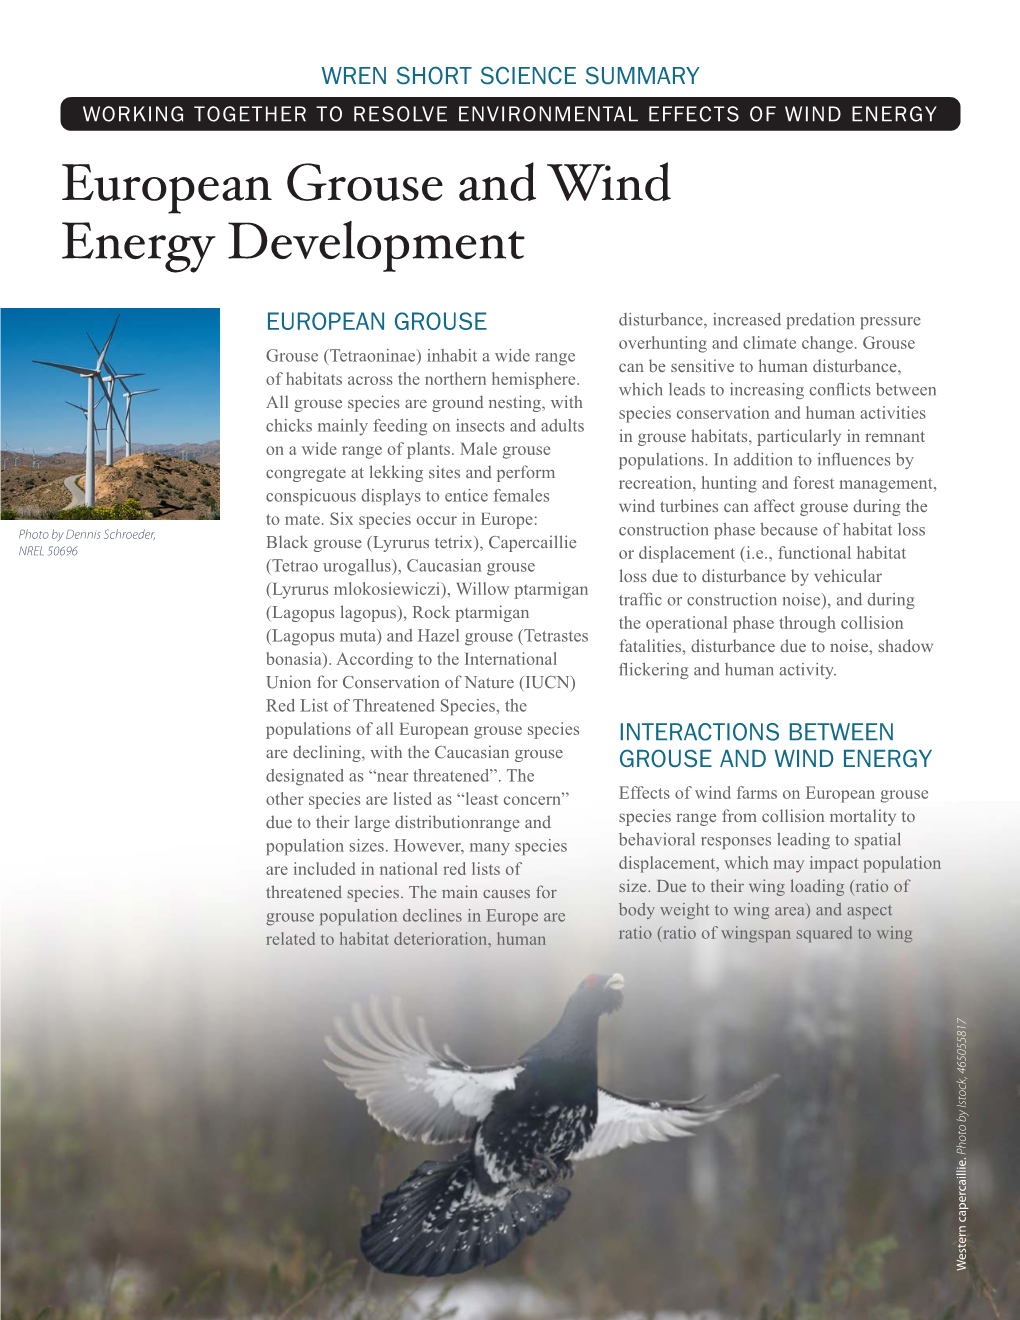 Download the European Grouse Short Science Summary